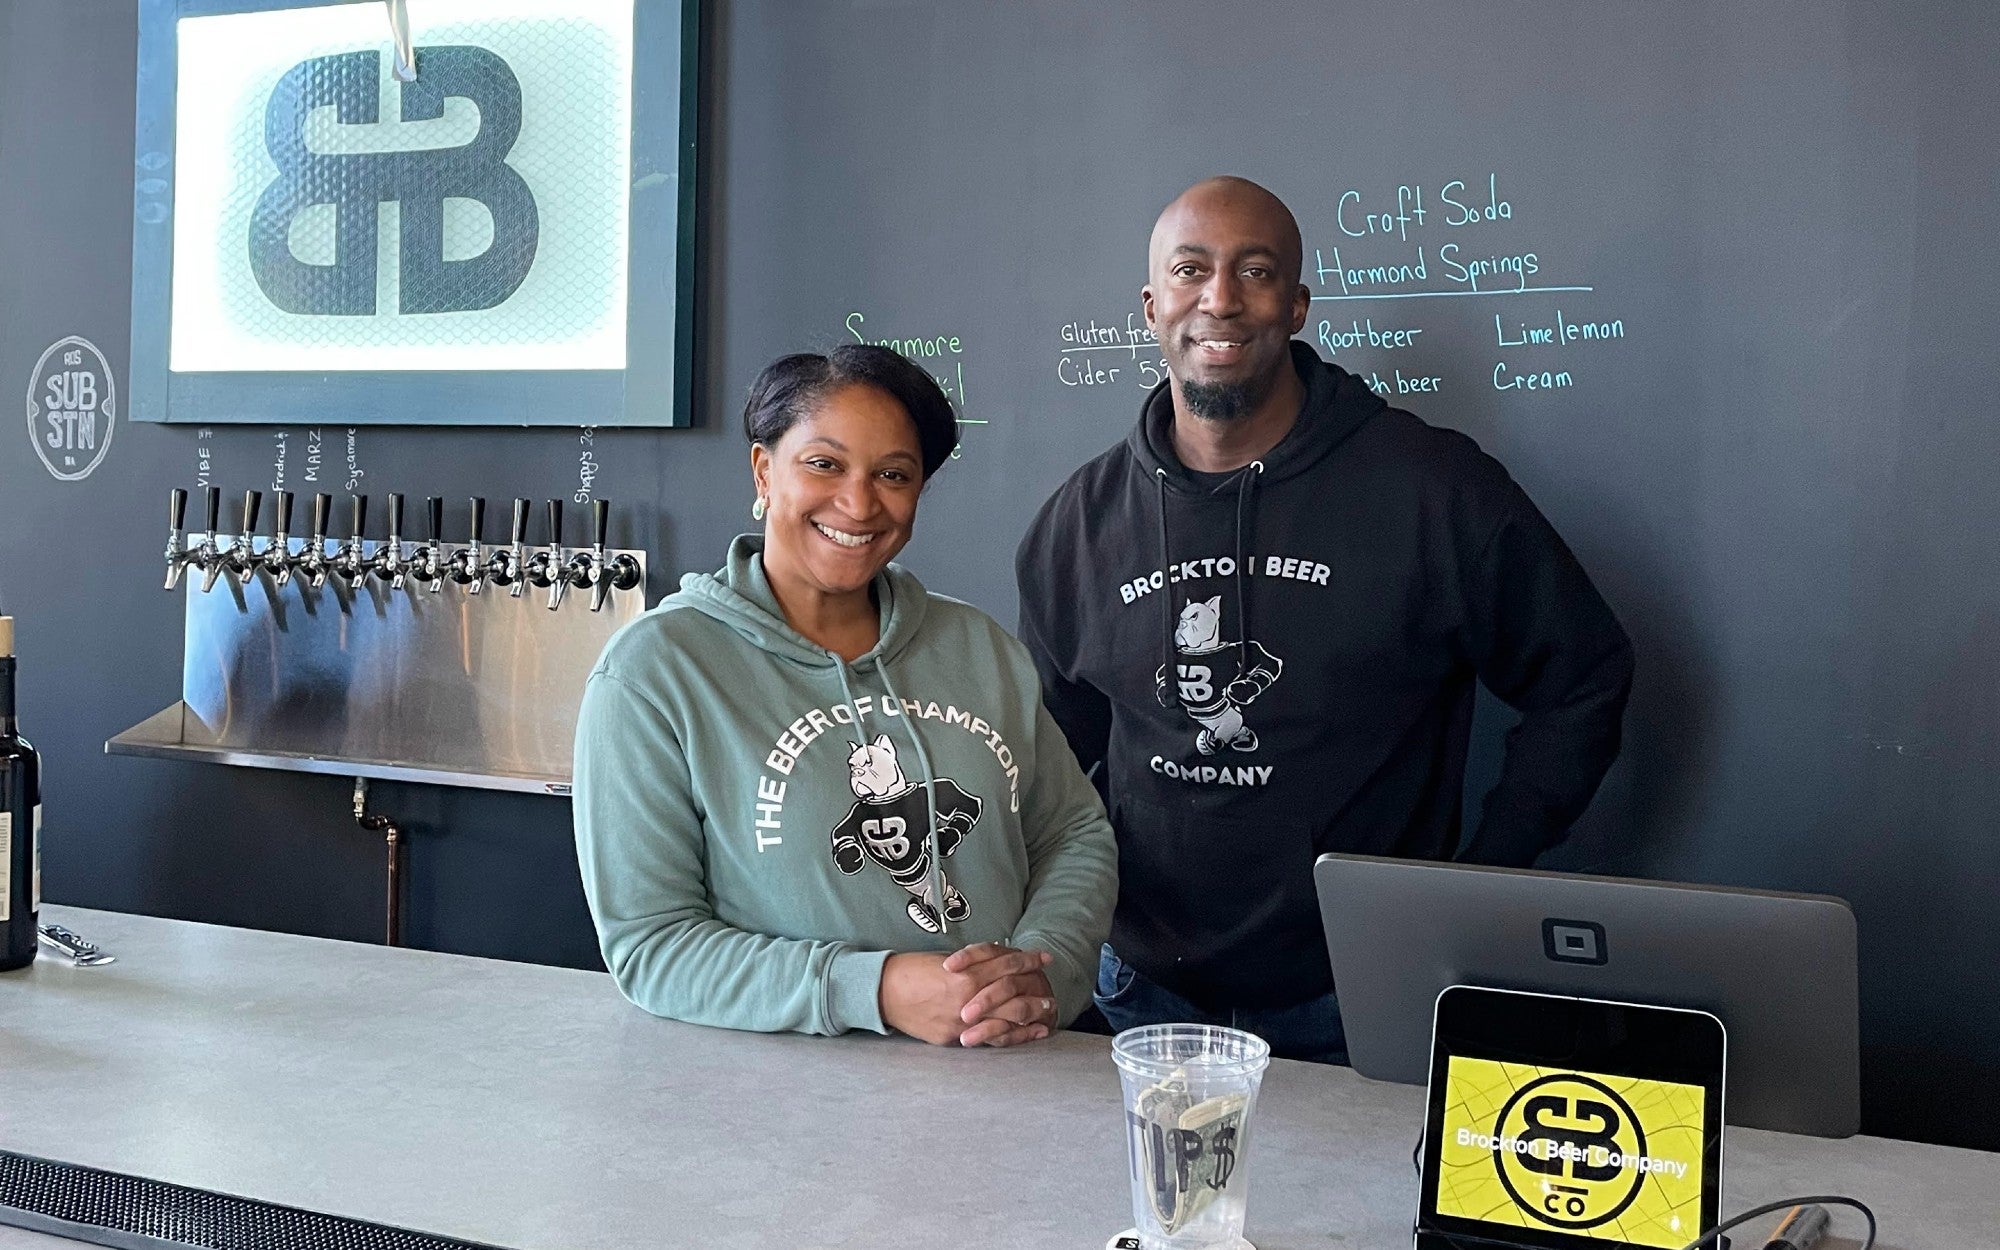 Brockton Beer cofounders and married couple LaTisha and Eval Silvera pose behind the bar at the Roslindale Substation